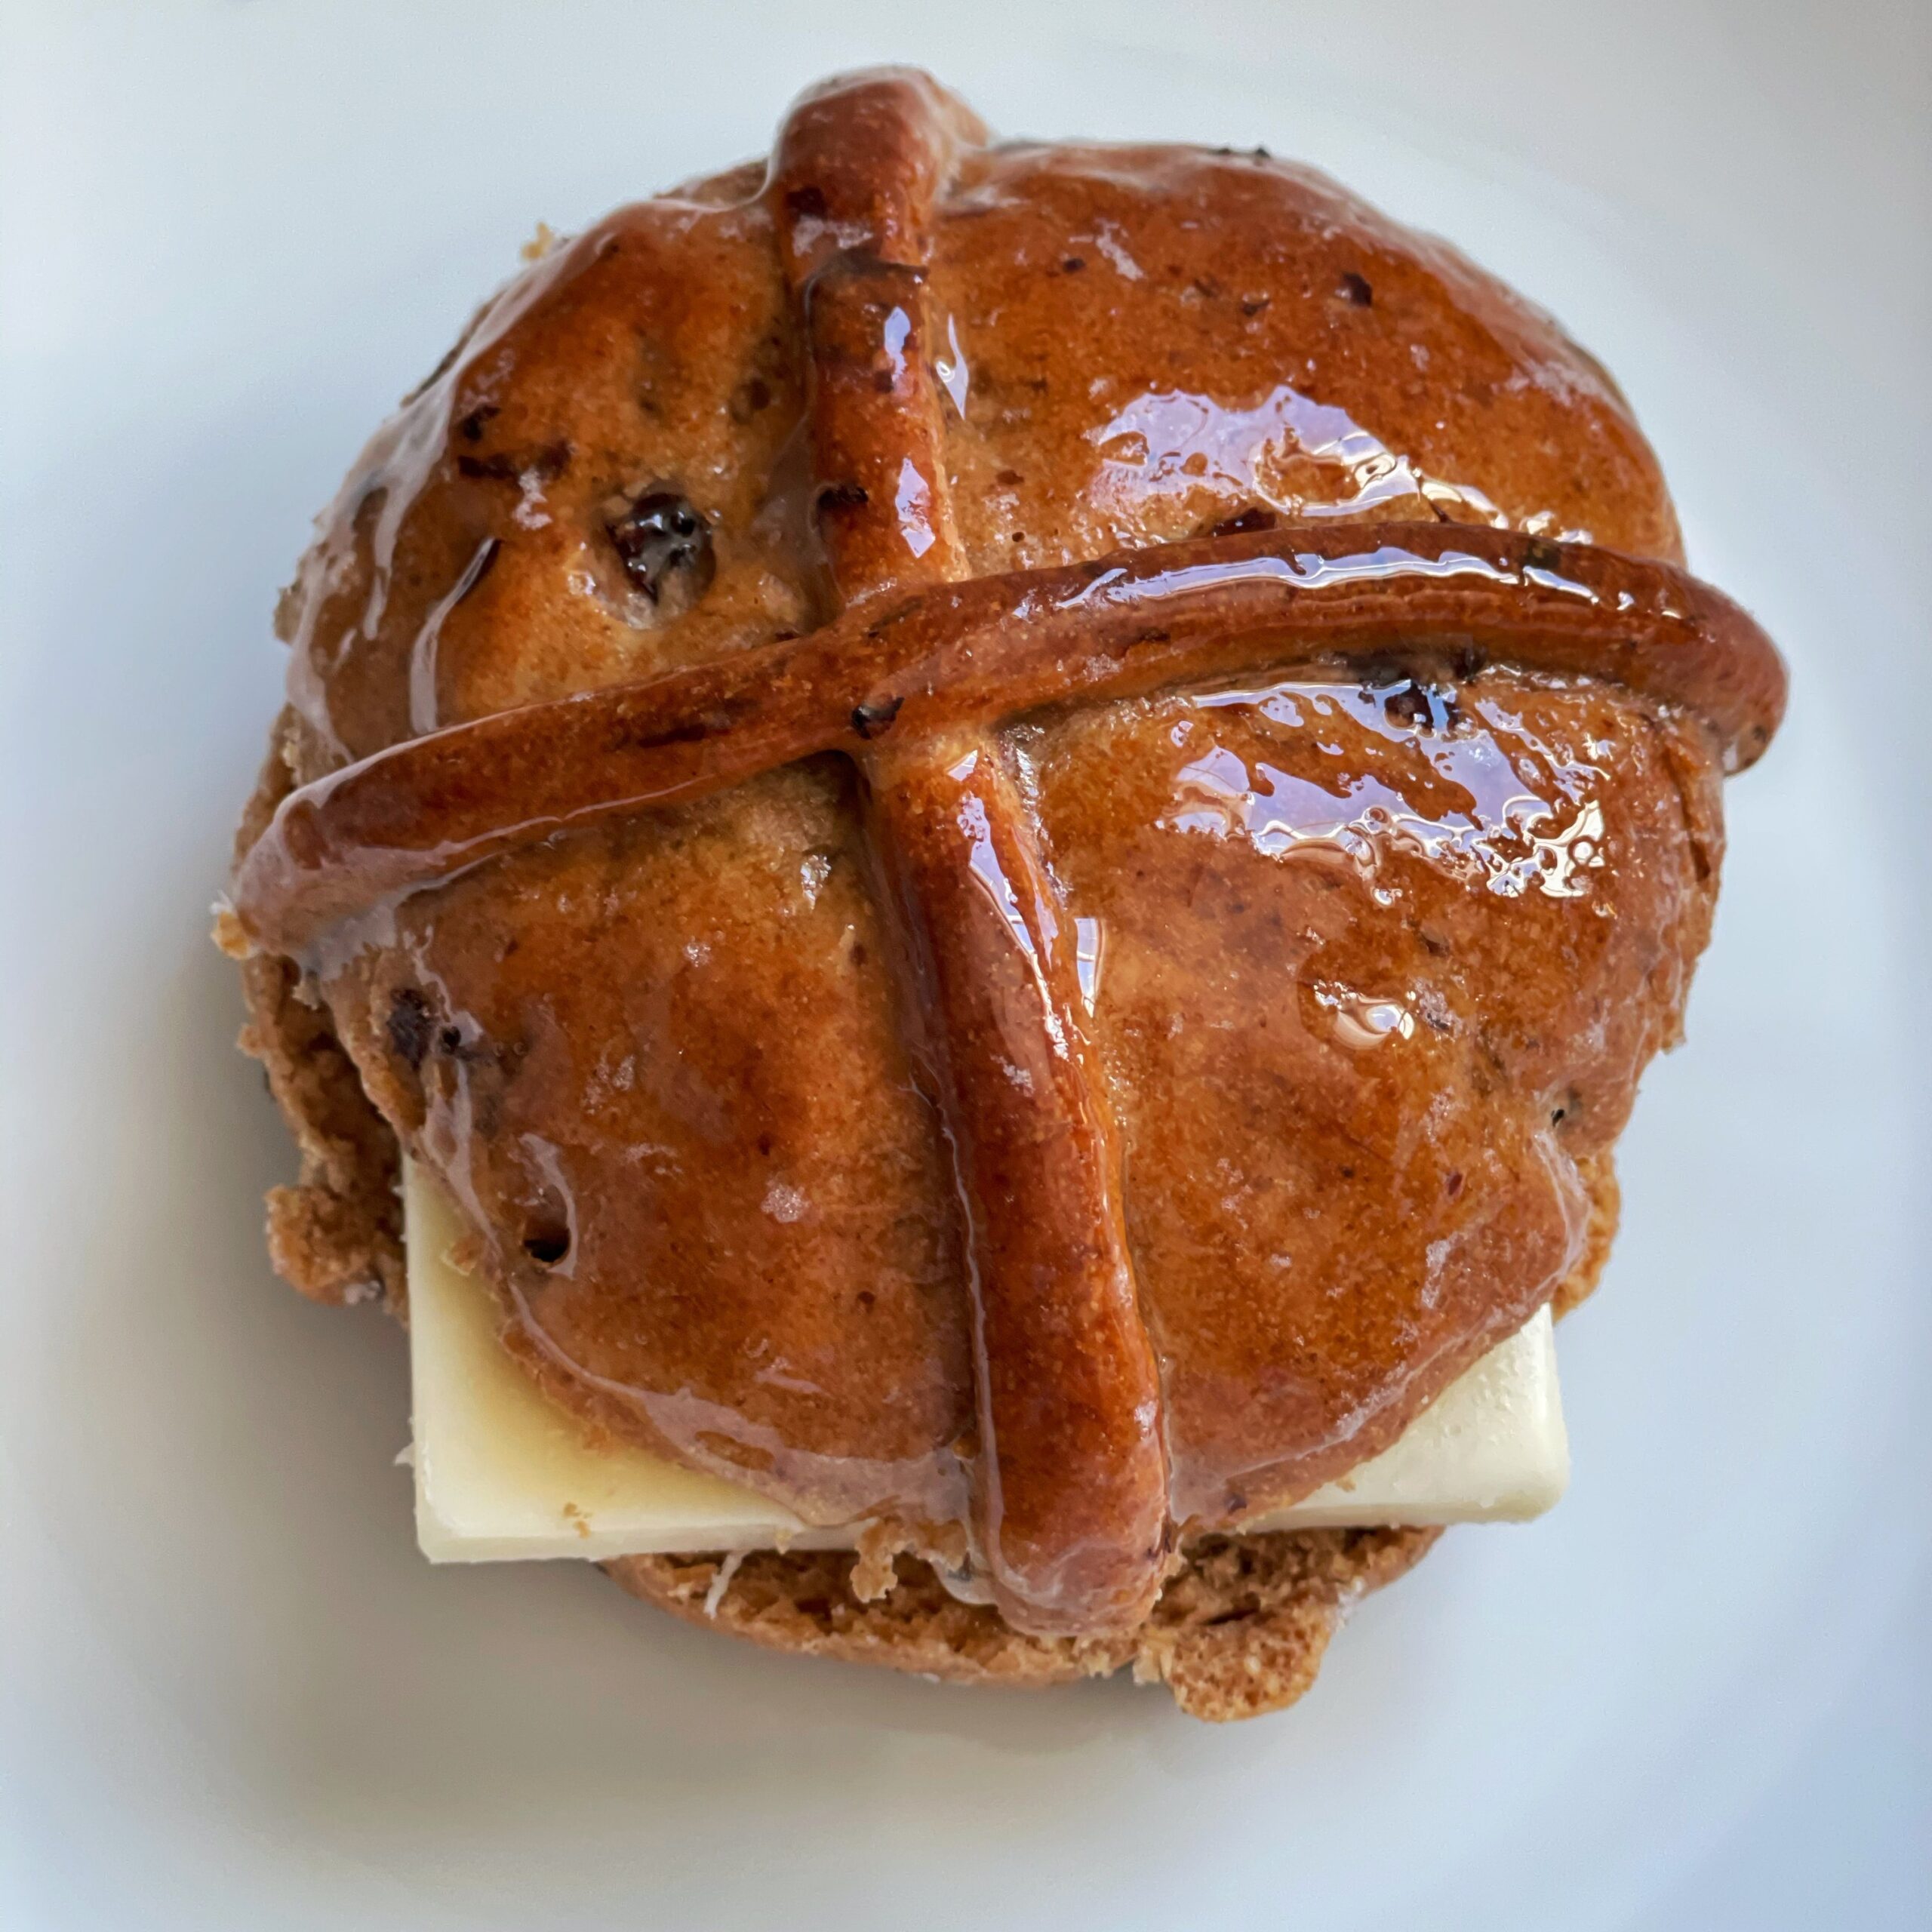 Cross buns on a white surface with a slice of cheese peeking out